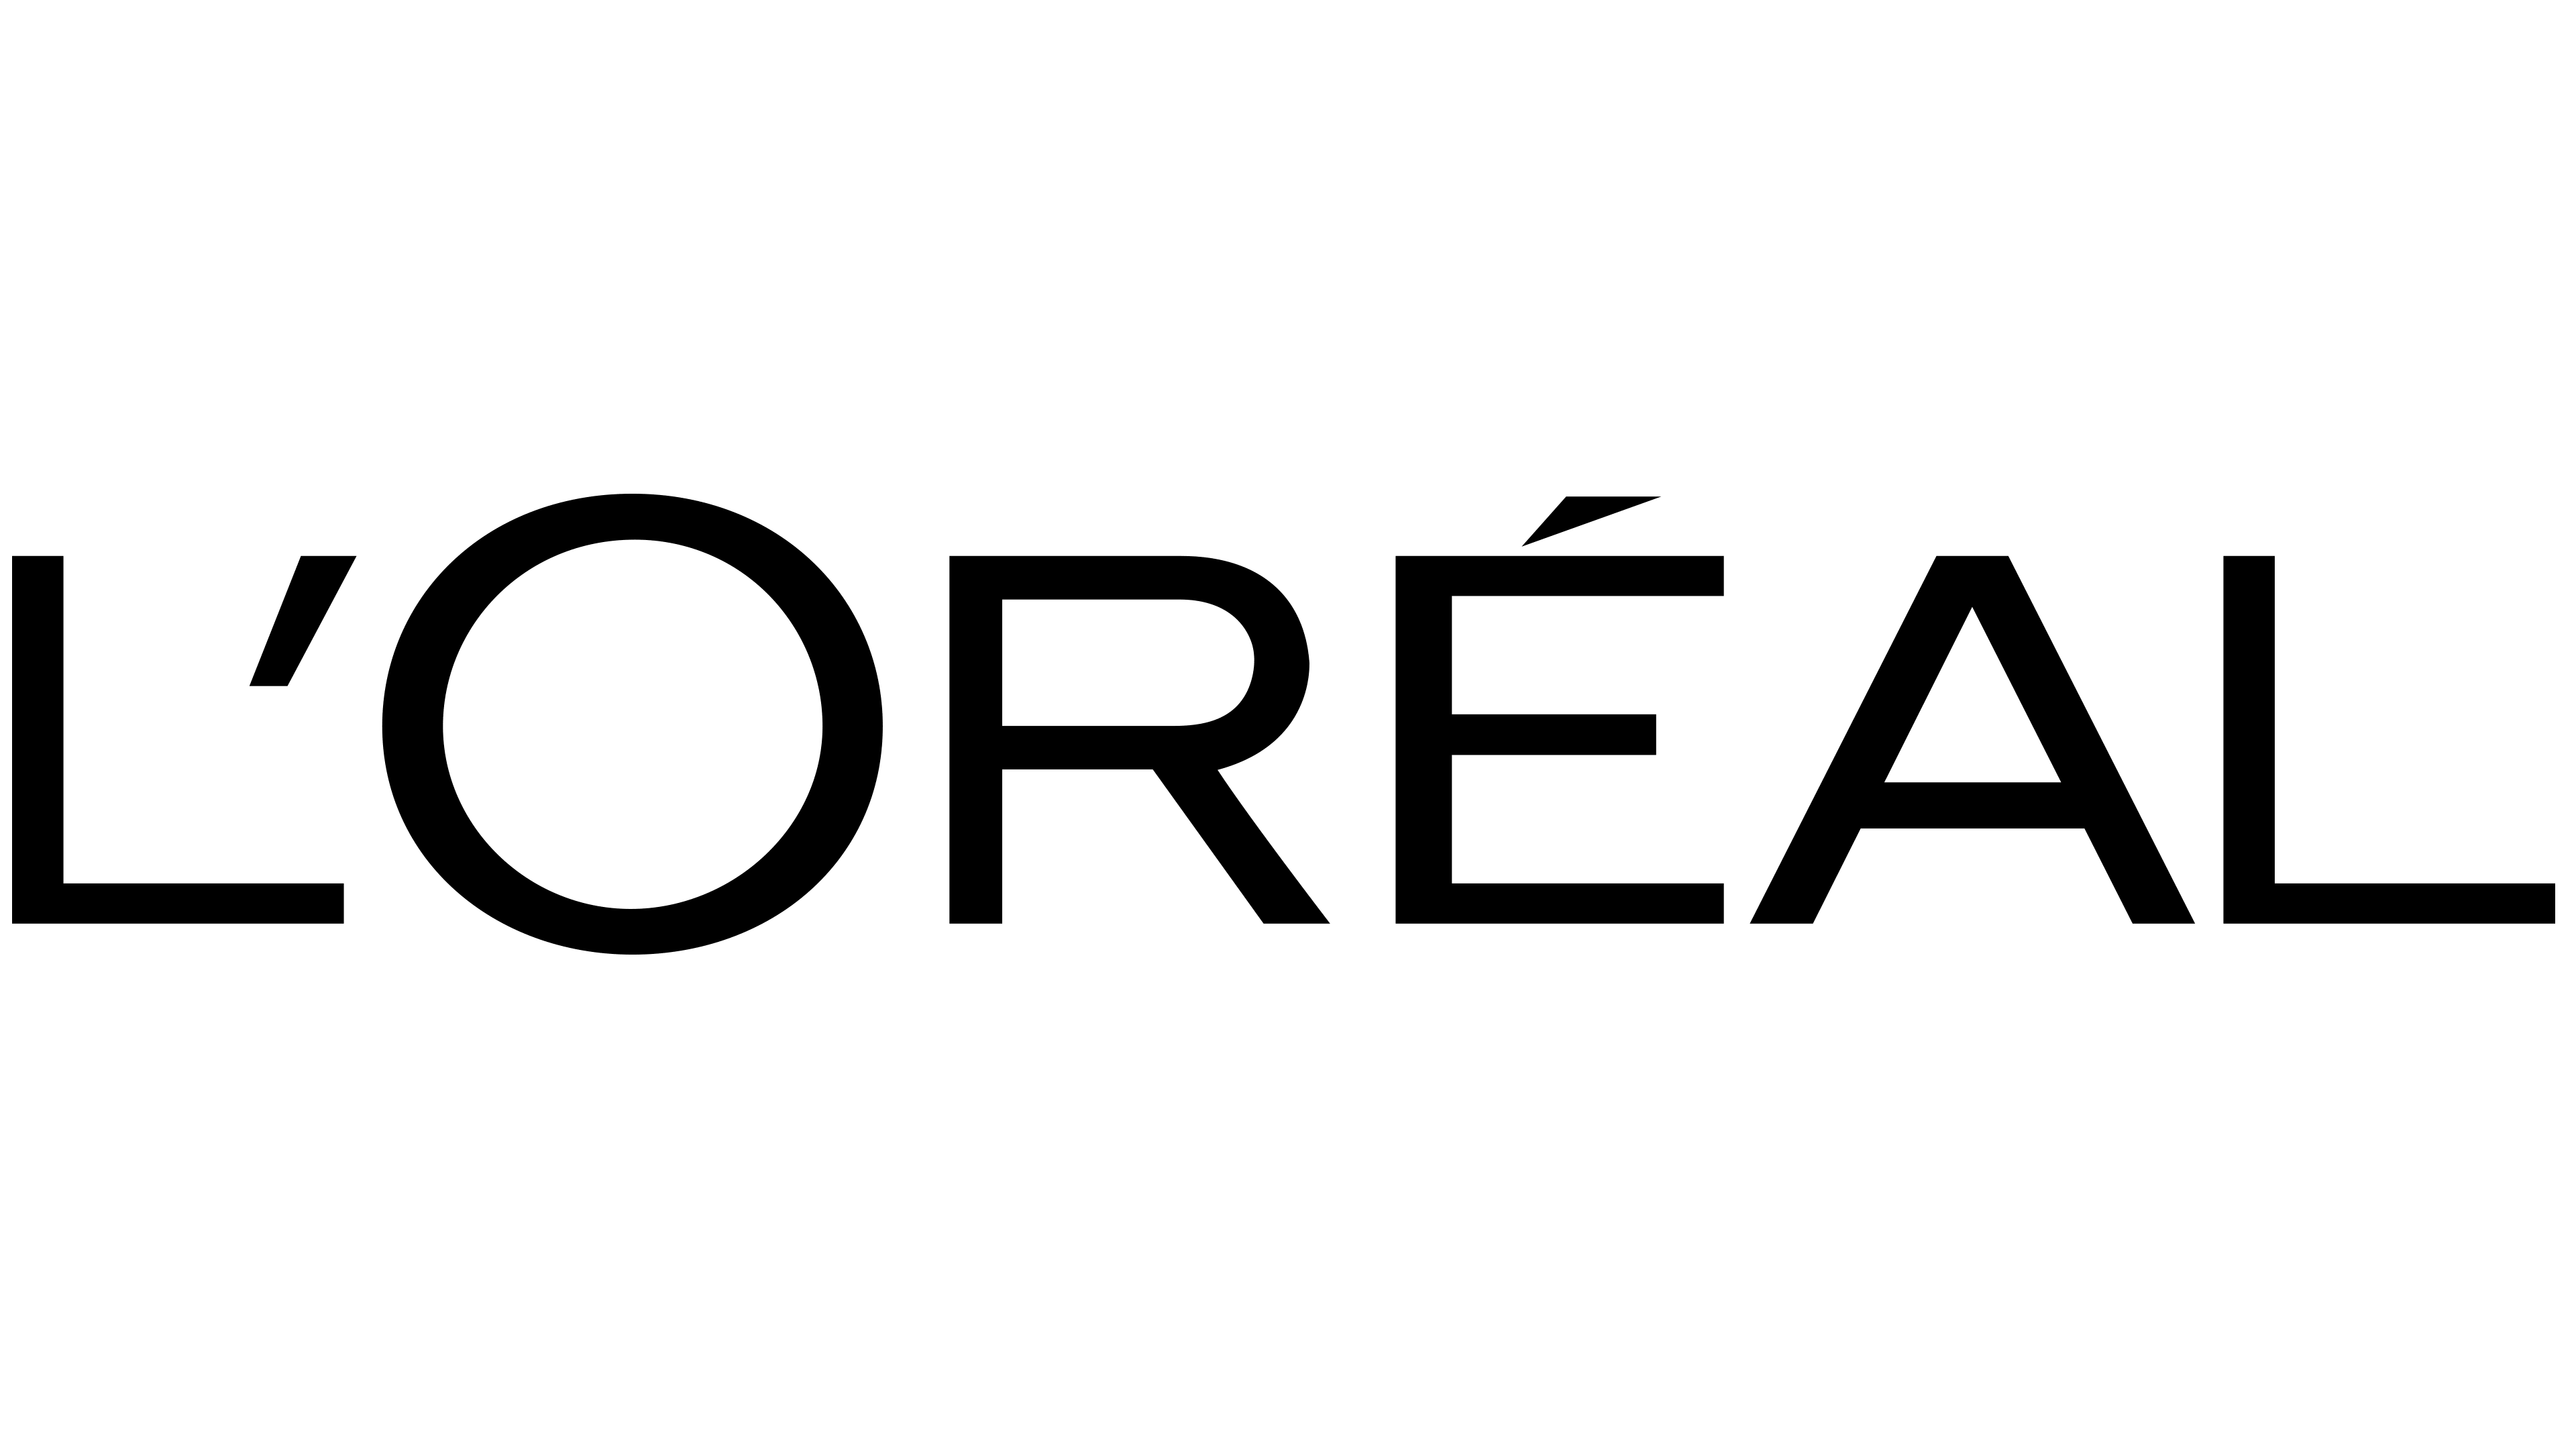 L'Oreal and The House of Marketing